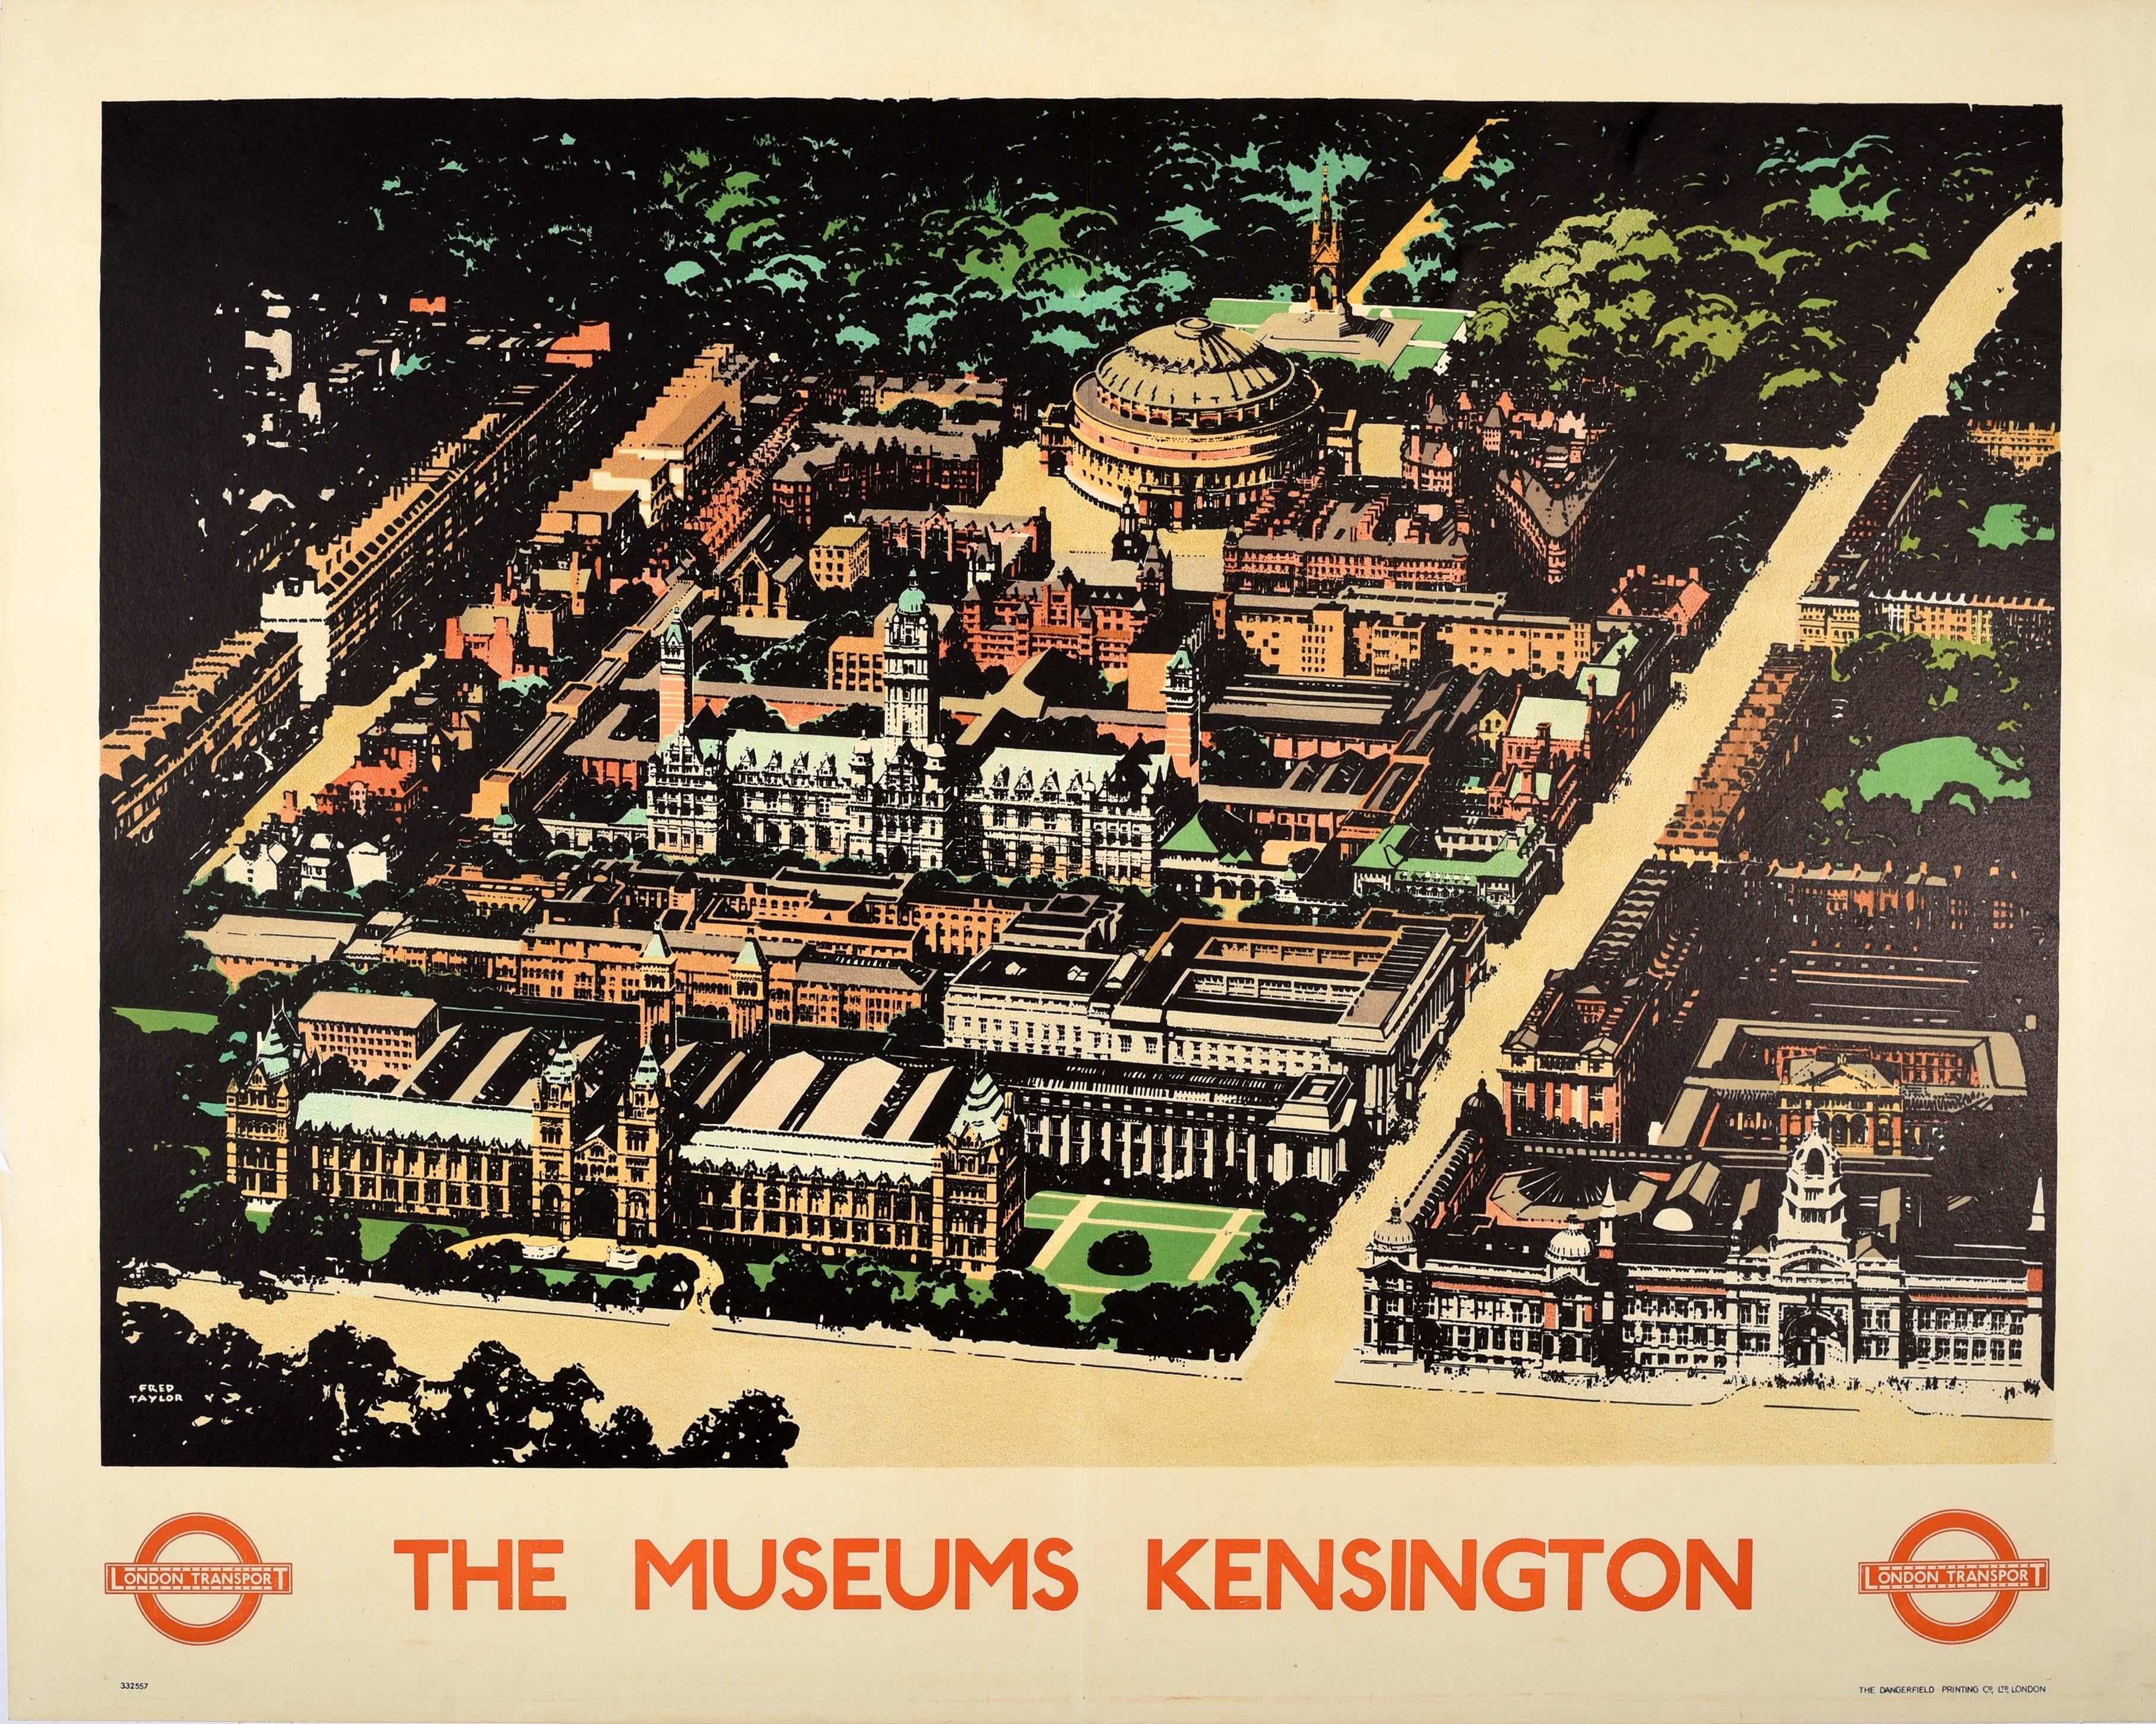 Original vintage London Transport poster - the Museums Kensington - featuring detailed artwork by Fred Taylor (1875-1963) depicting an aerial map view of the V&A Victoria and Albert Museum (founded 1852), the Natural History Museum (founded 1881)